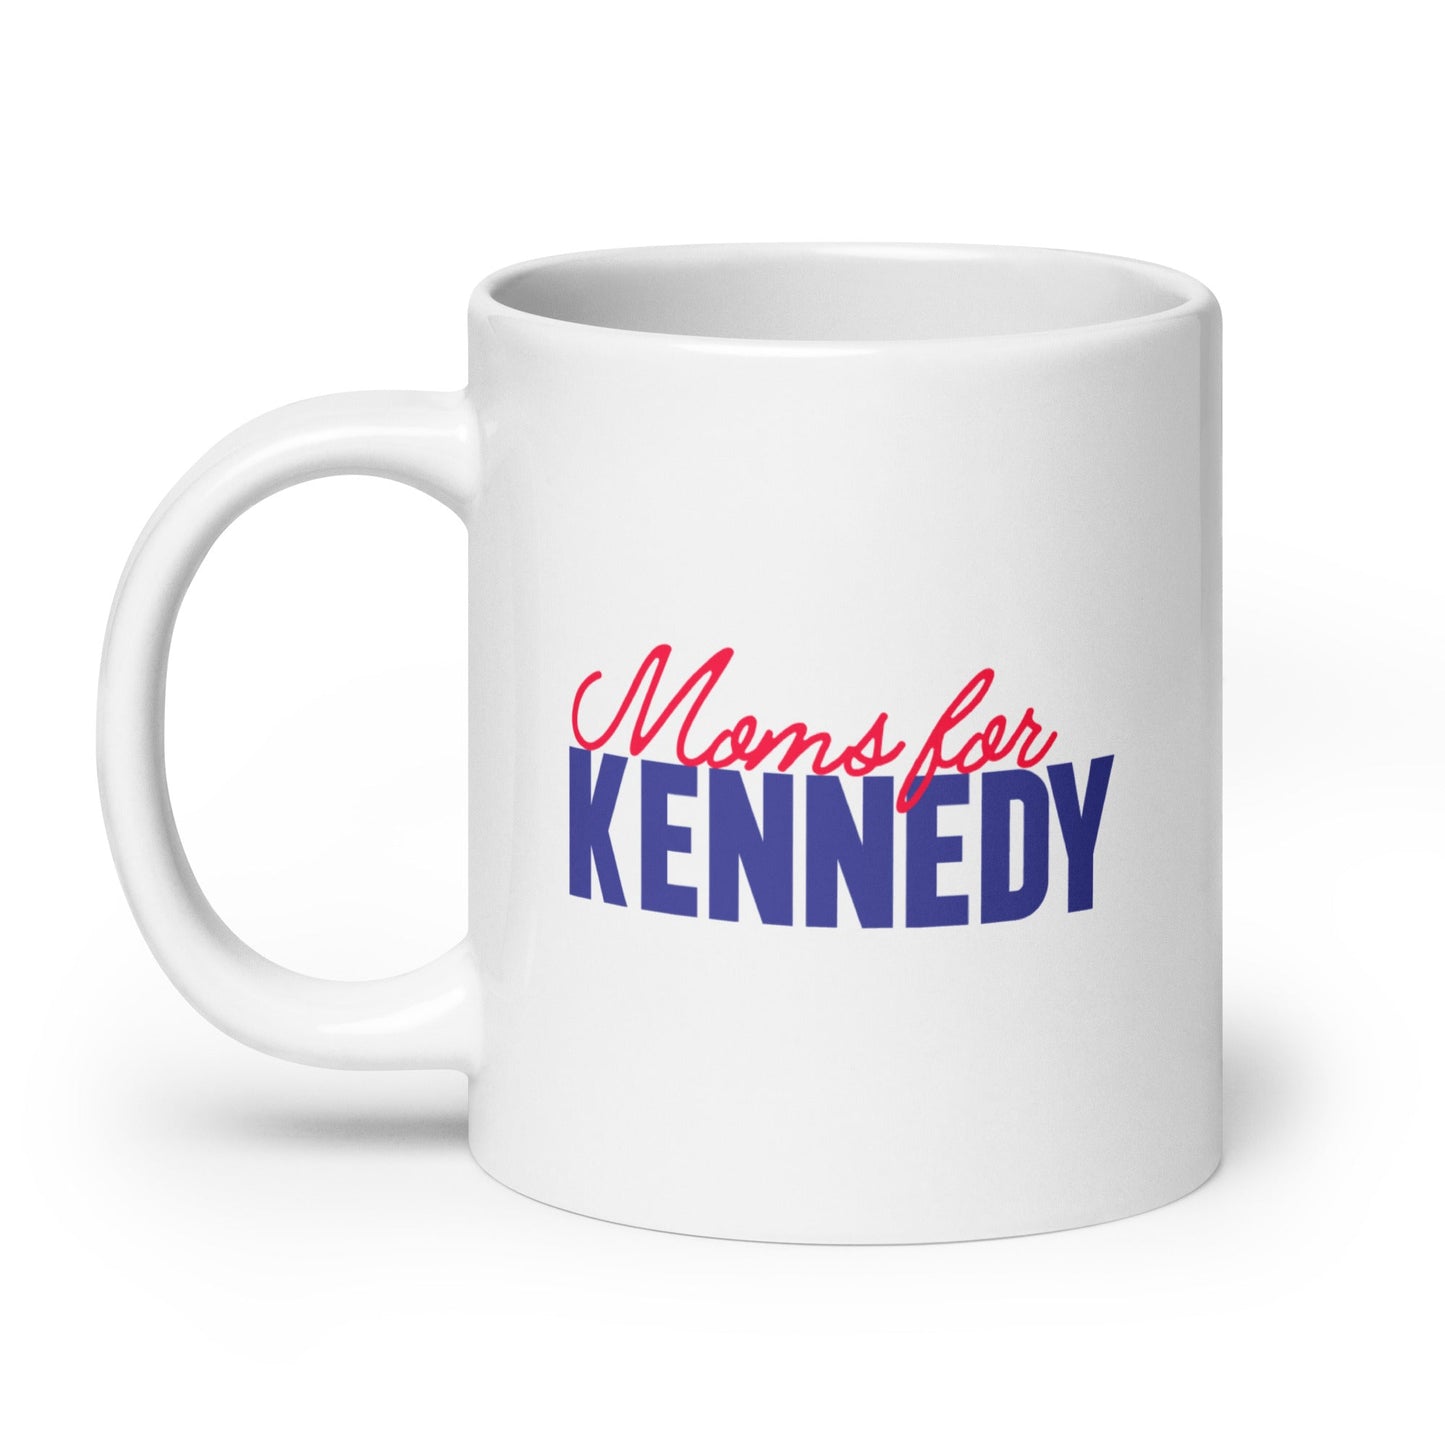 Moms for Kennedy Mug - TEAM KENNEDY. All rights reserved